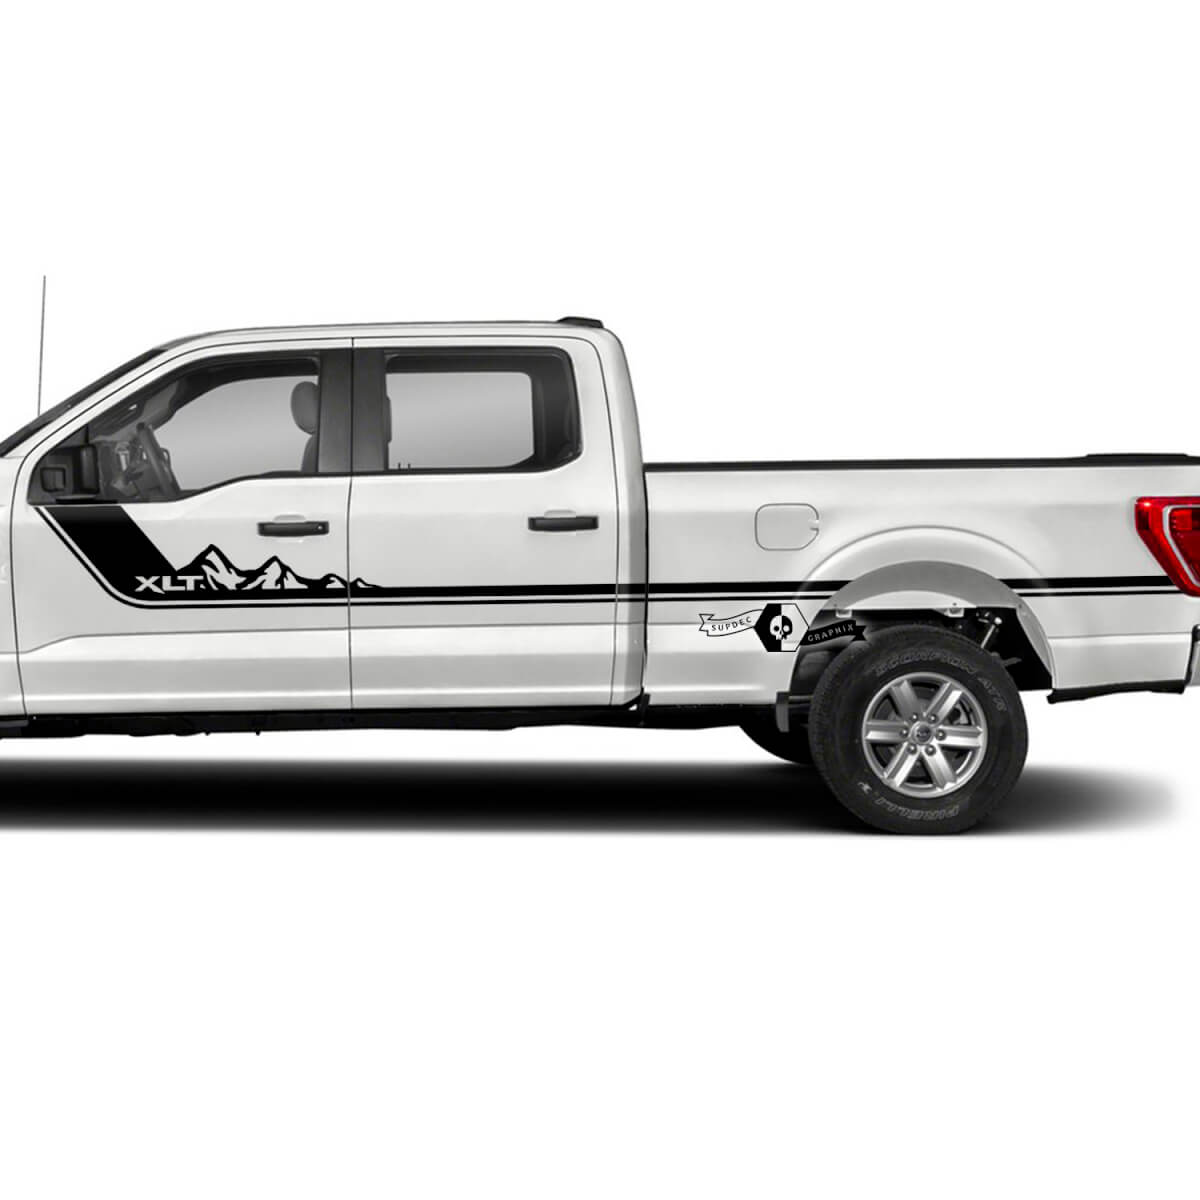 Paar Ford F-150 XLT Side Bed Doors Stripe Mountains F-150 Logo Graphics Side Decals Aufkleber
